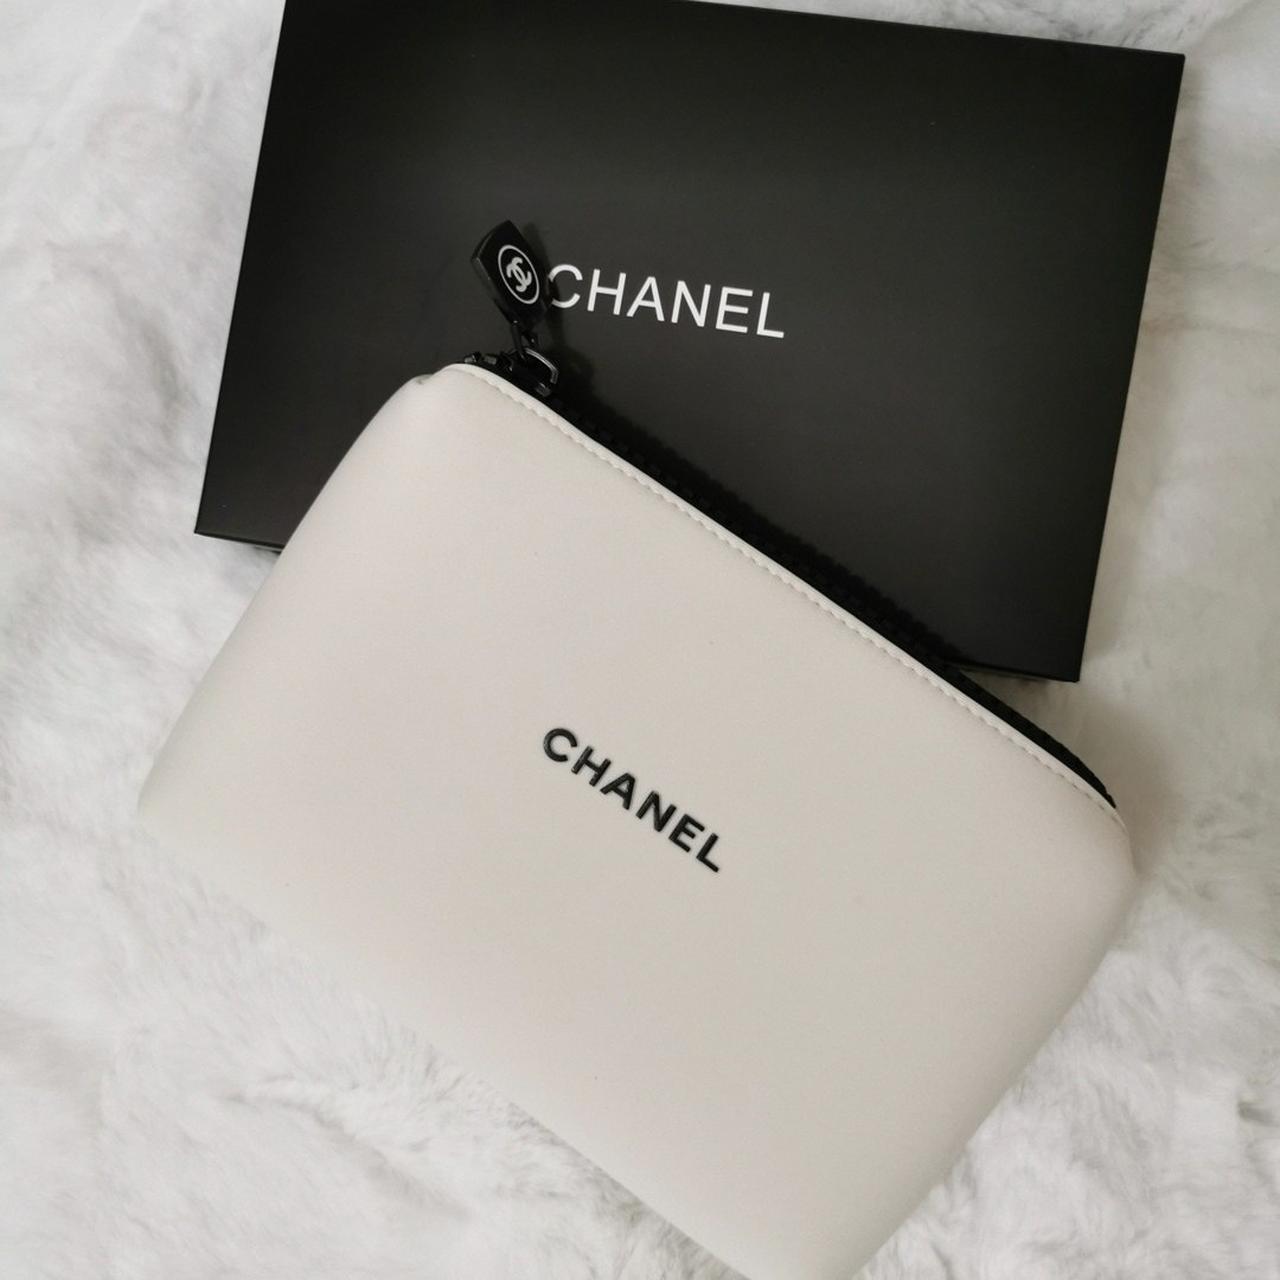 CHANEL White Makeup Makeup Bags for sale